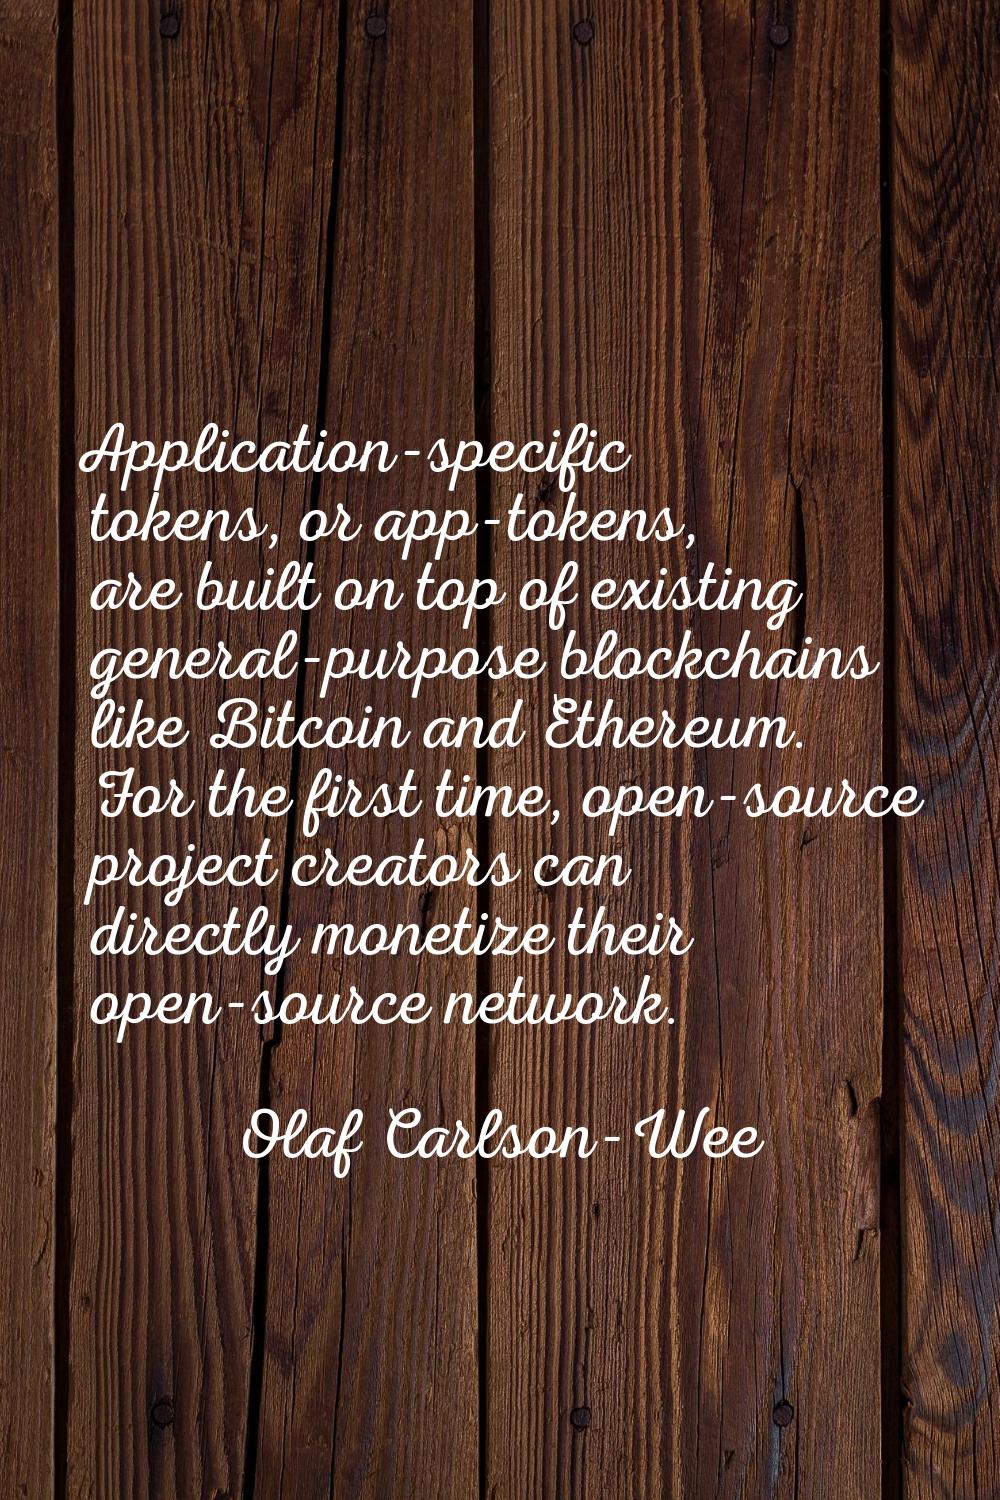 Application-specific tokens, or app-tokens, are built on top of existing general-purpose blockchain